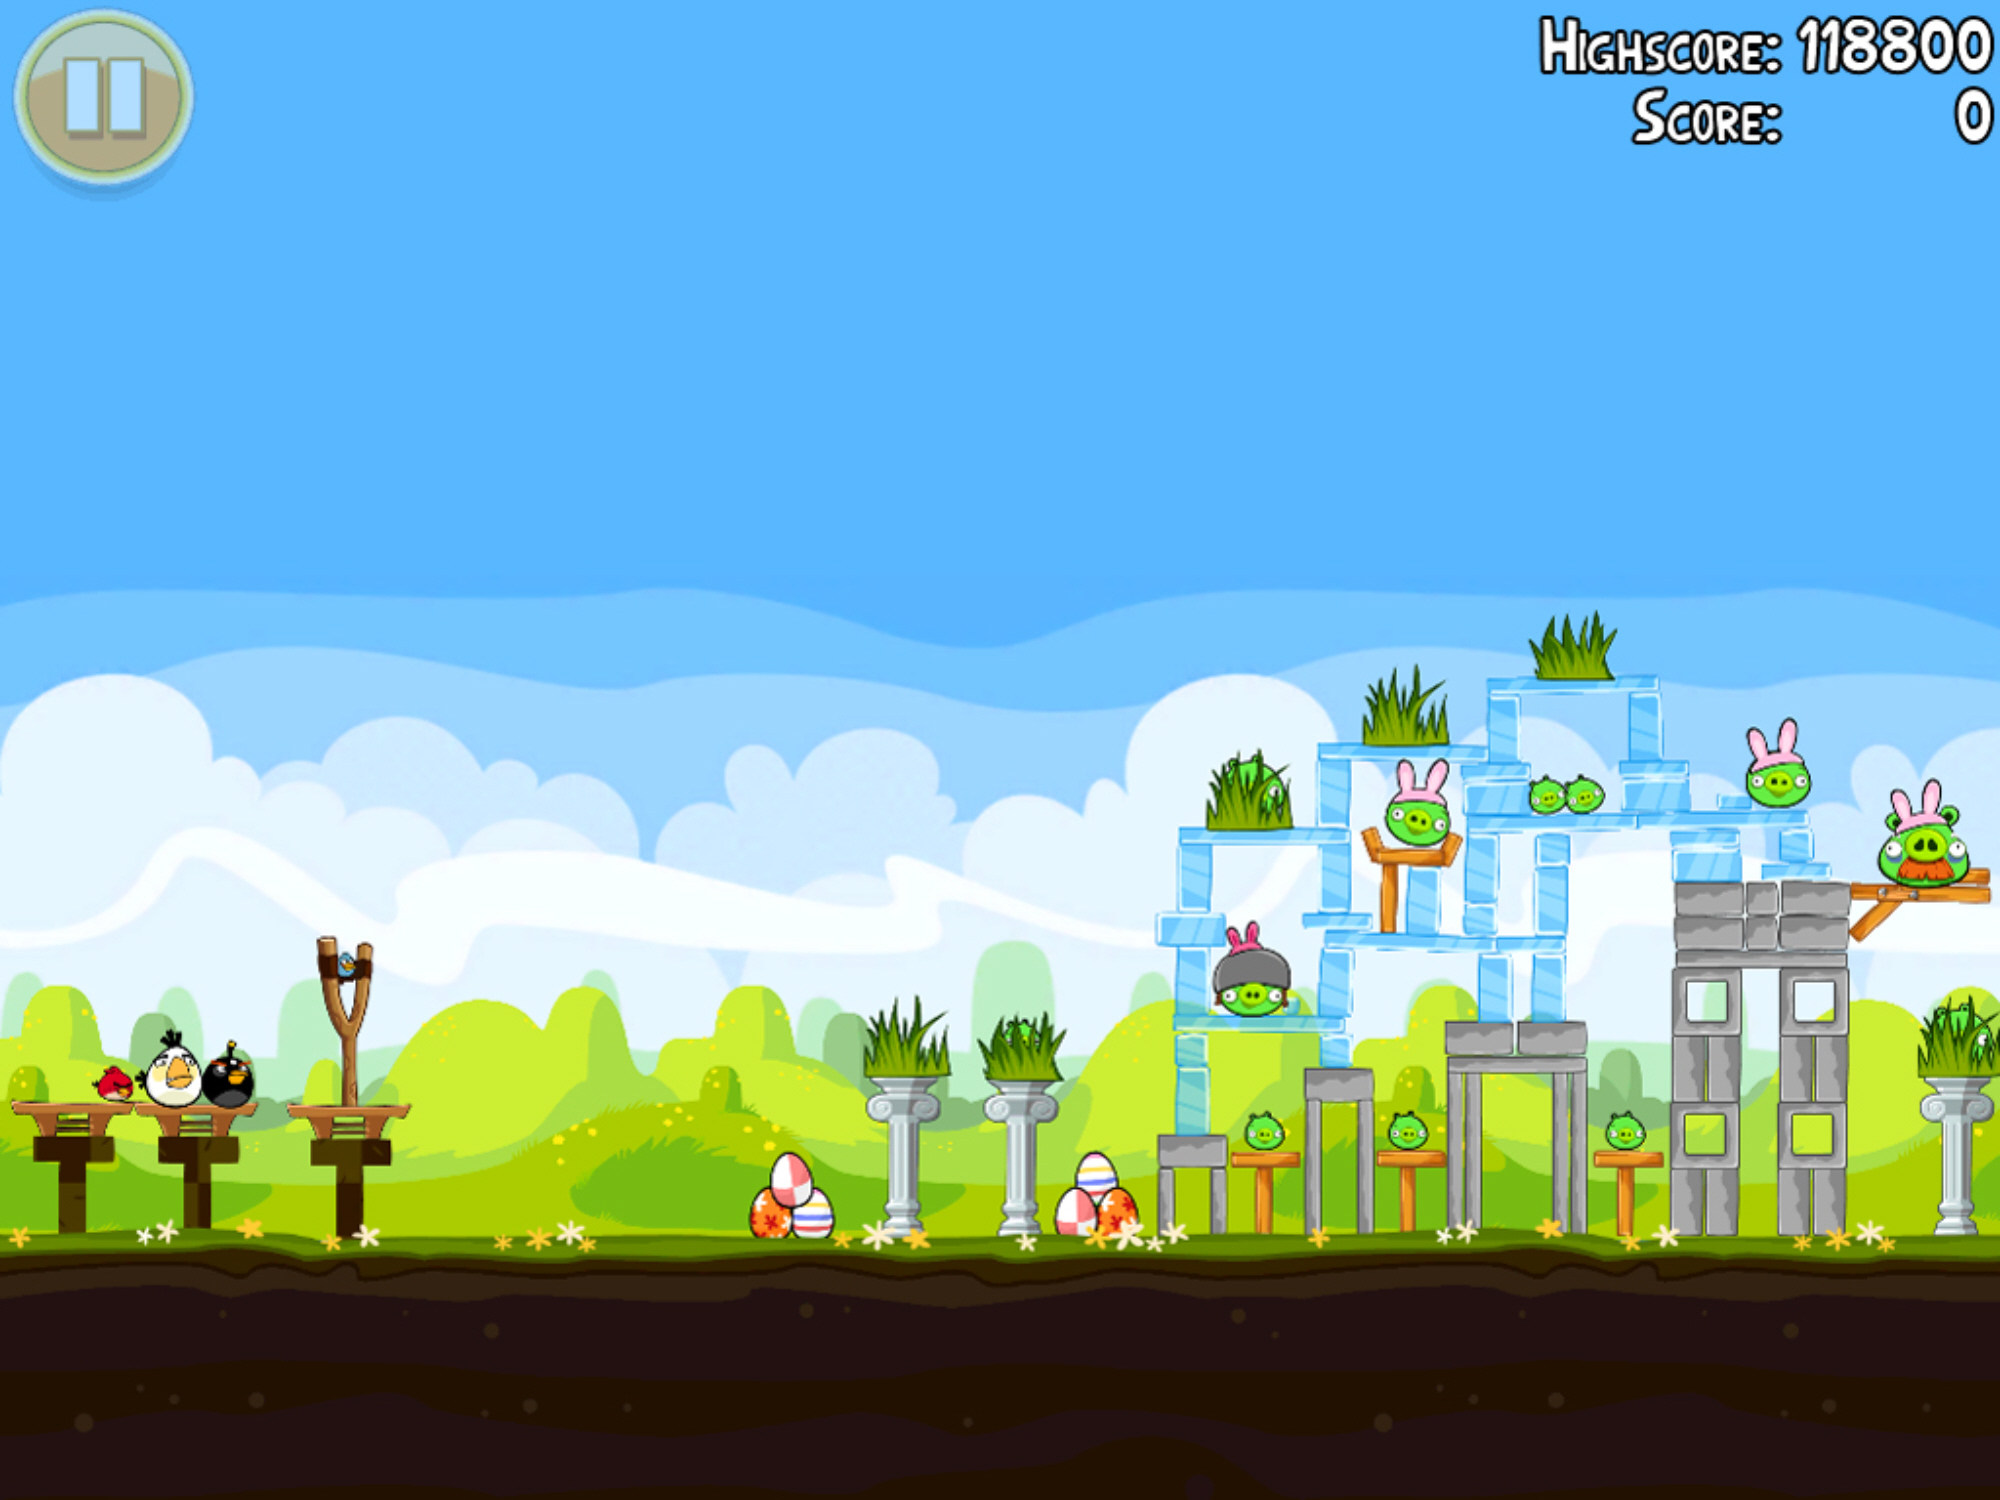 angry-birds-easter-update-announced-with-screens-s-ios-android-609239.jpg